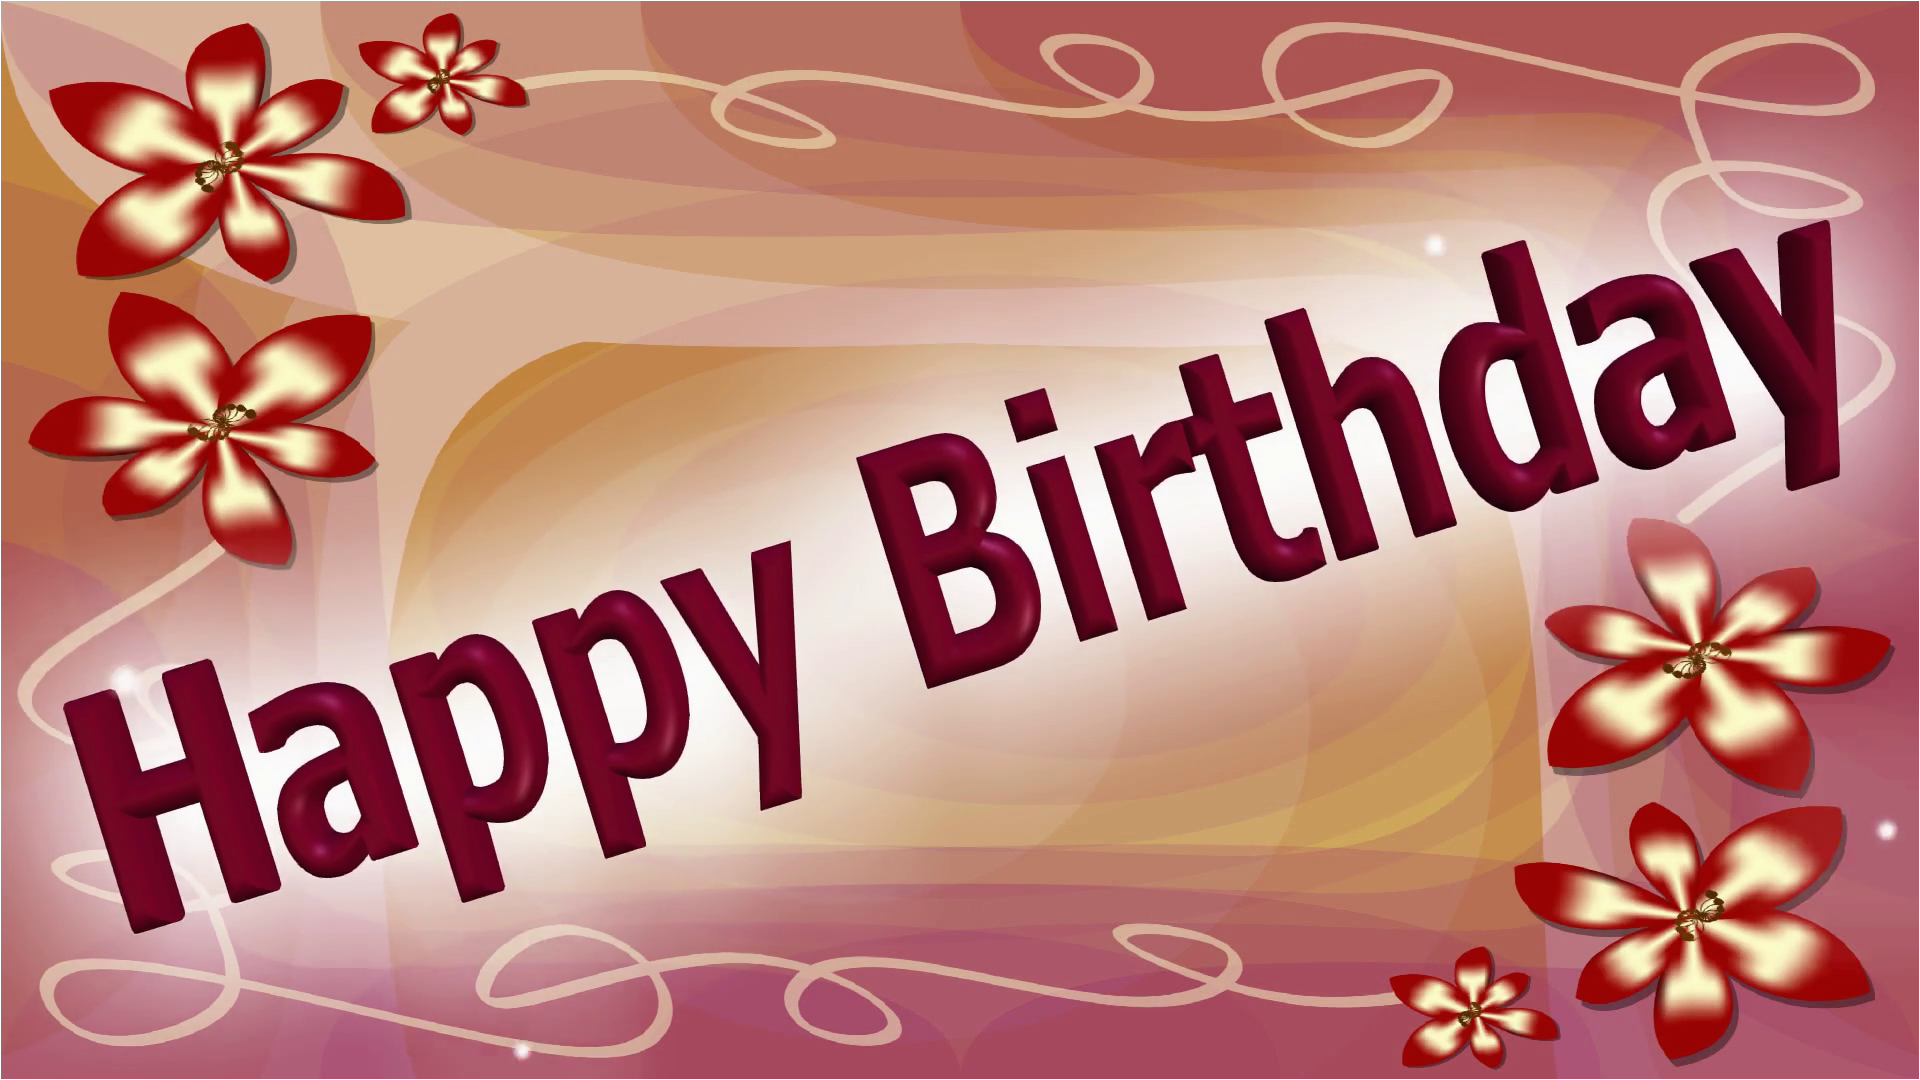 happy birthday banner with dancing and leaping letters on elegant pink abstract background with dark red flowers silver sparkle falling slowly over area buagh28mwj3ocb905